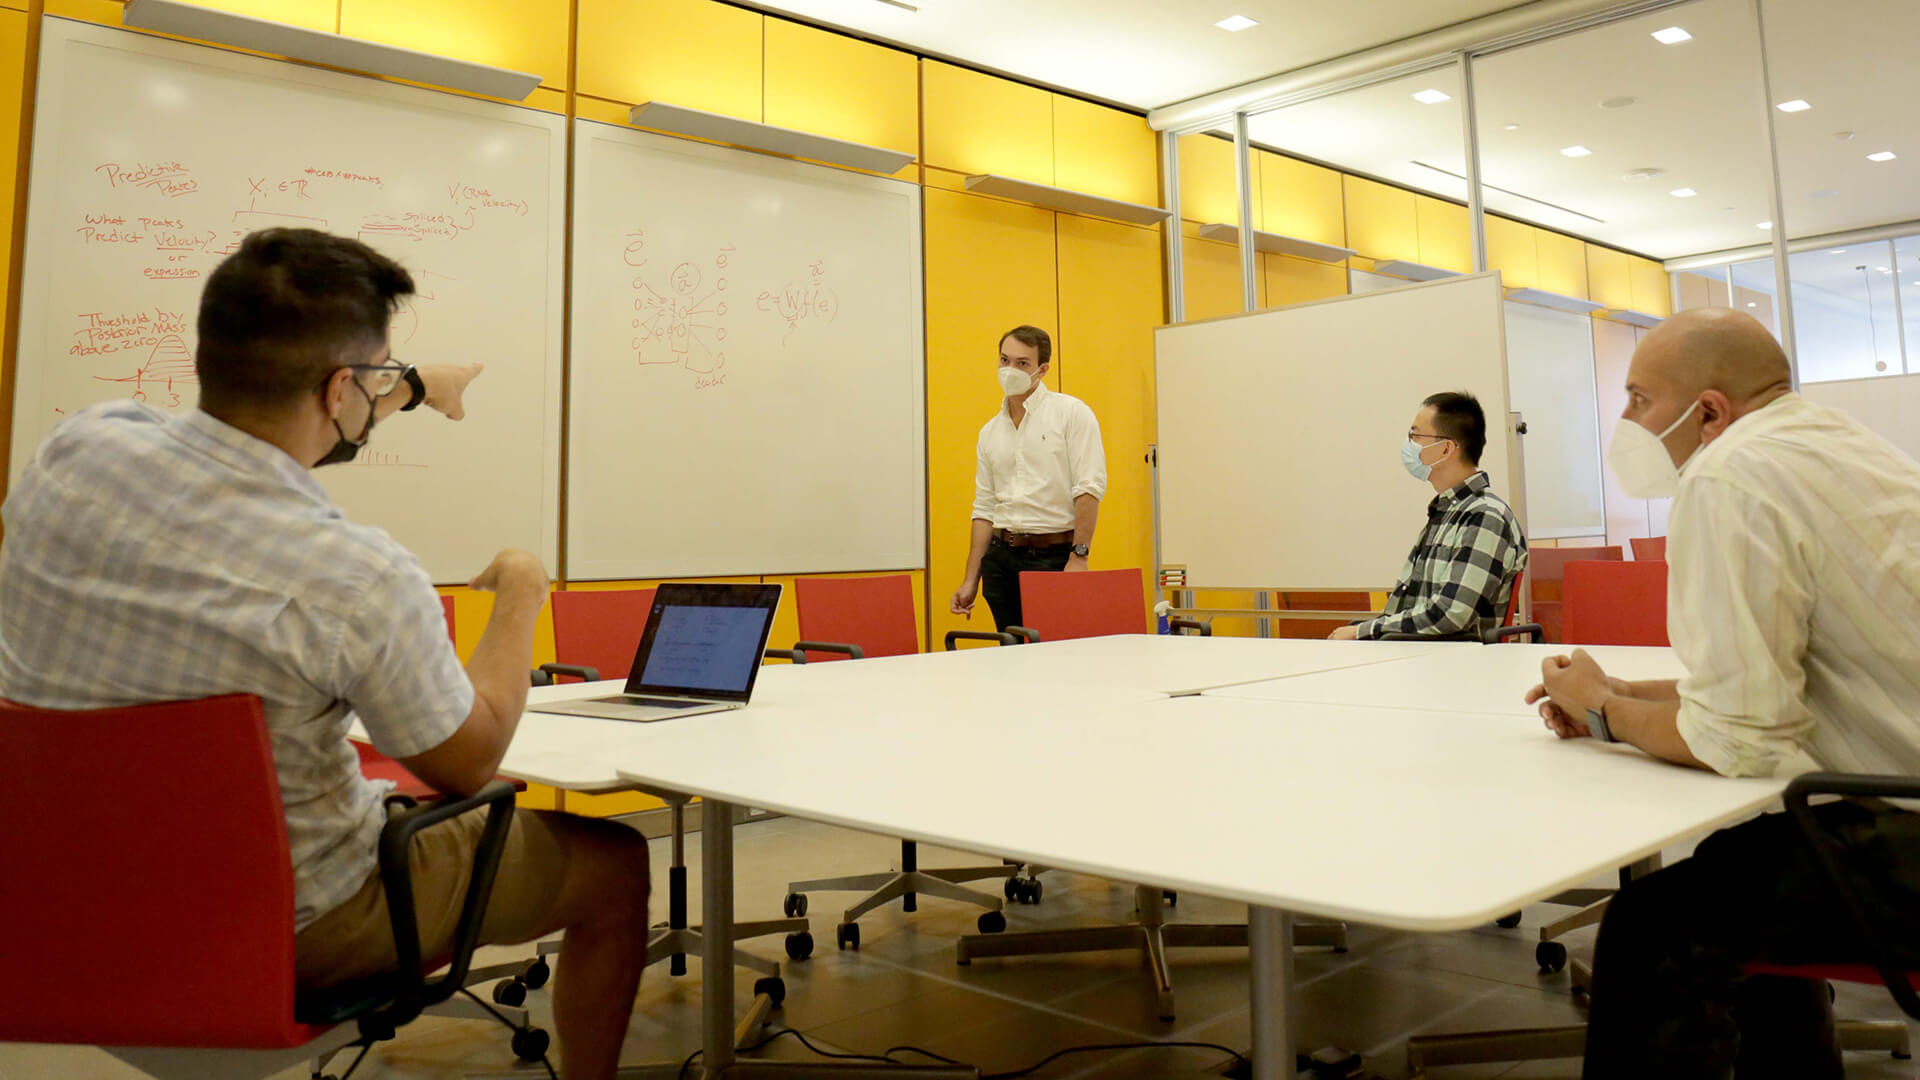 A group of people wearing masks discuss the content of a whiteboard in a meeting room.